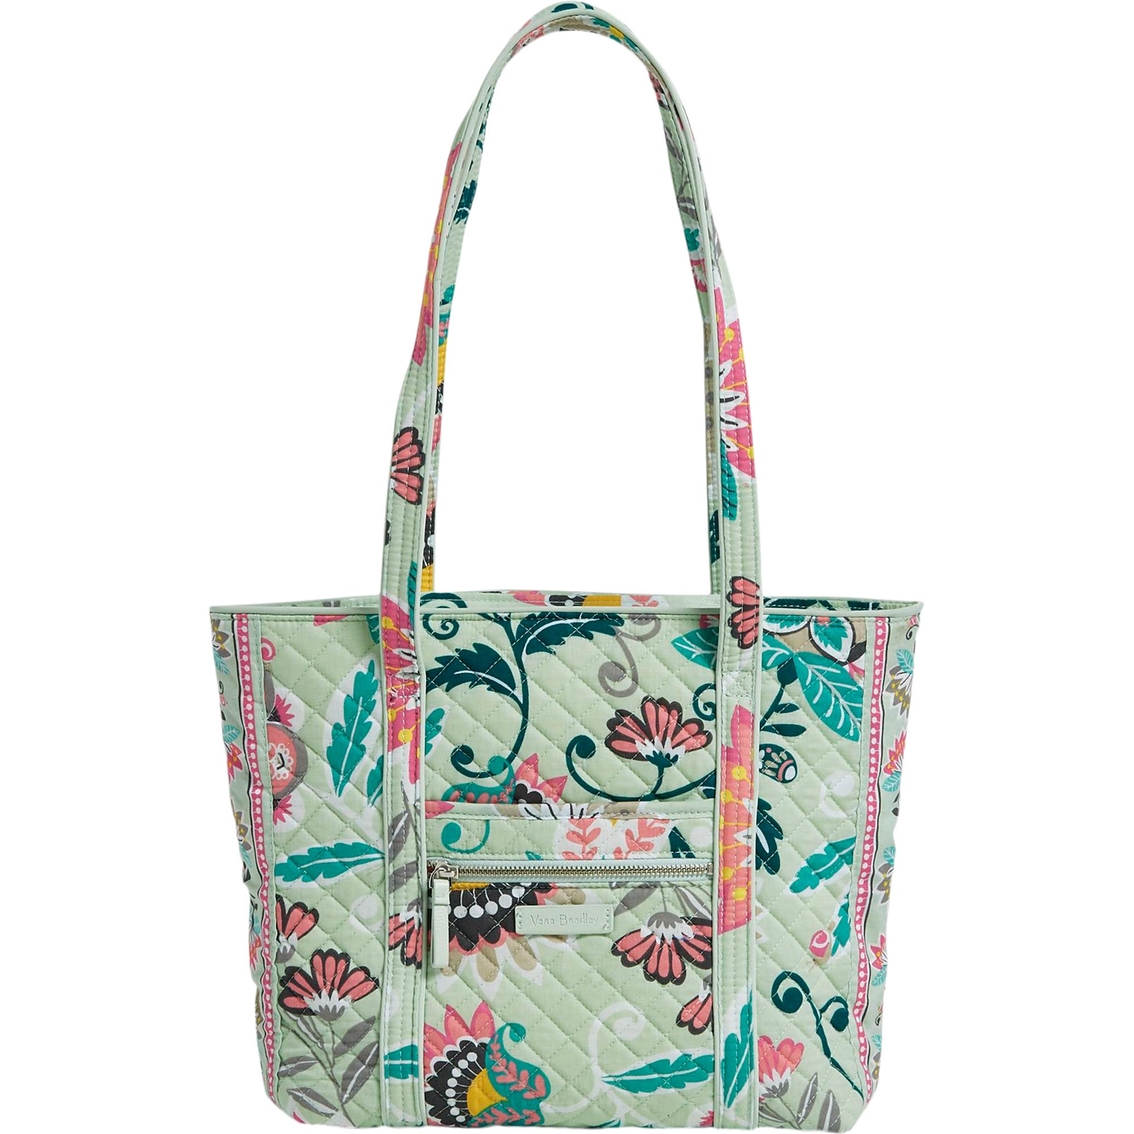 Vera Bradley Small Tote, Mint Flower | Totes & Shoppers | Clothing ...